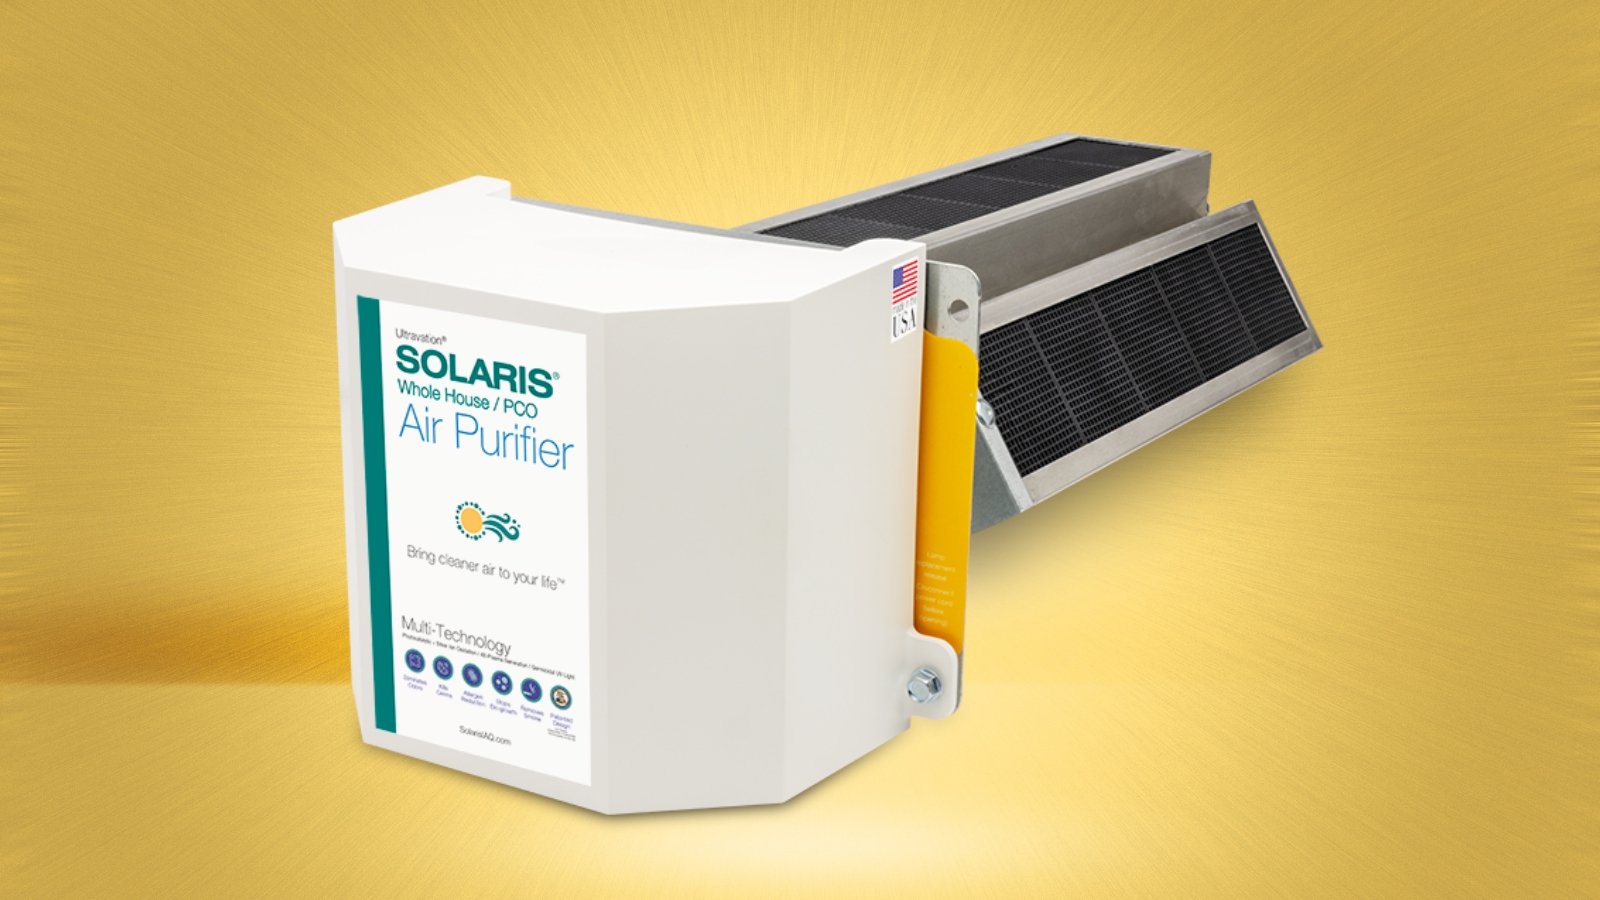 Solaris® Air Purifier on yellow background